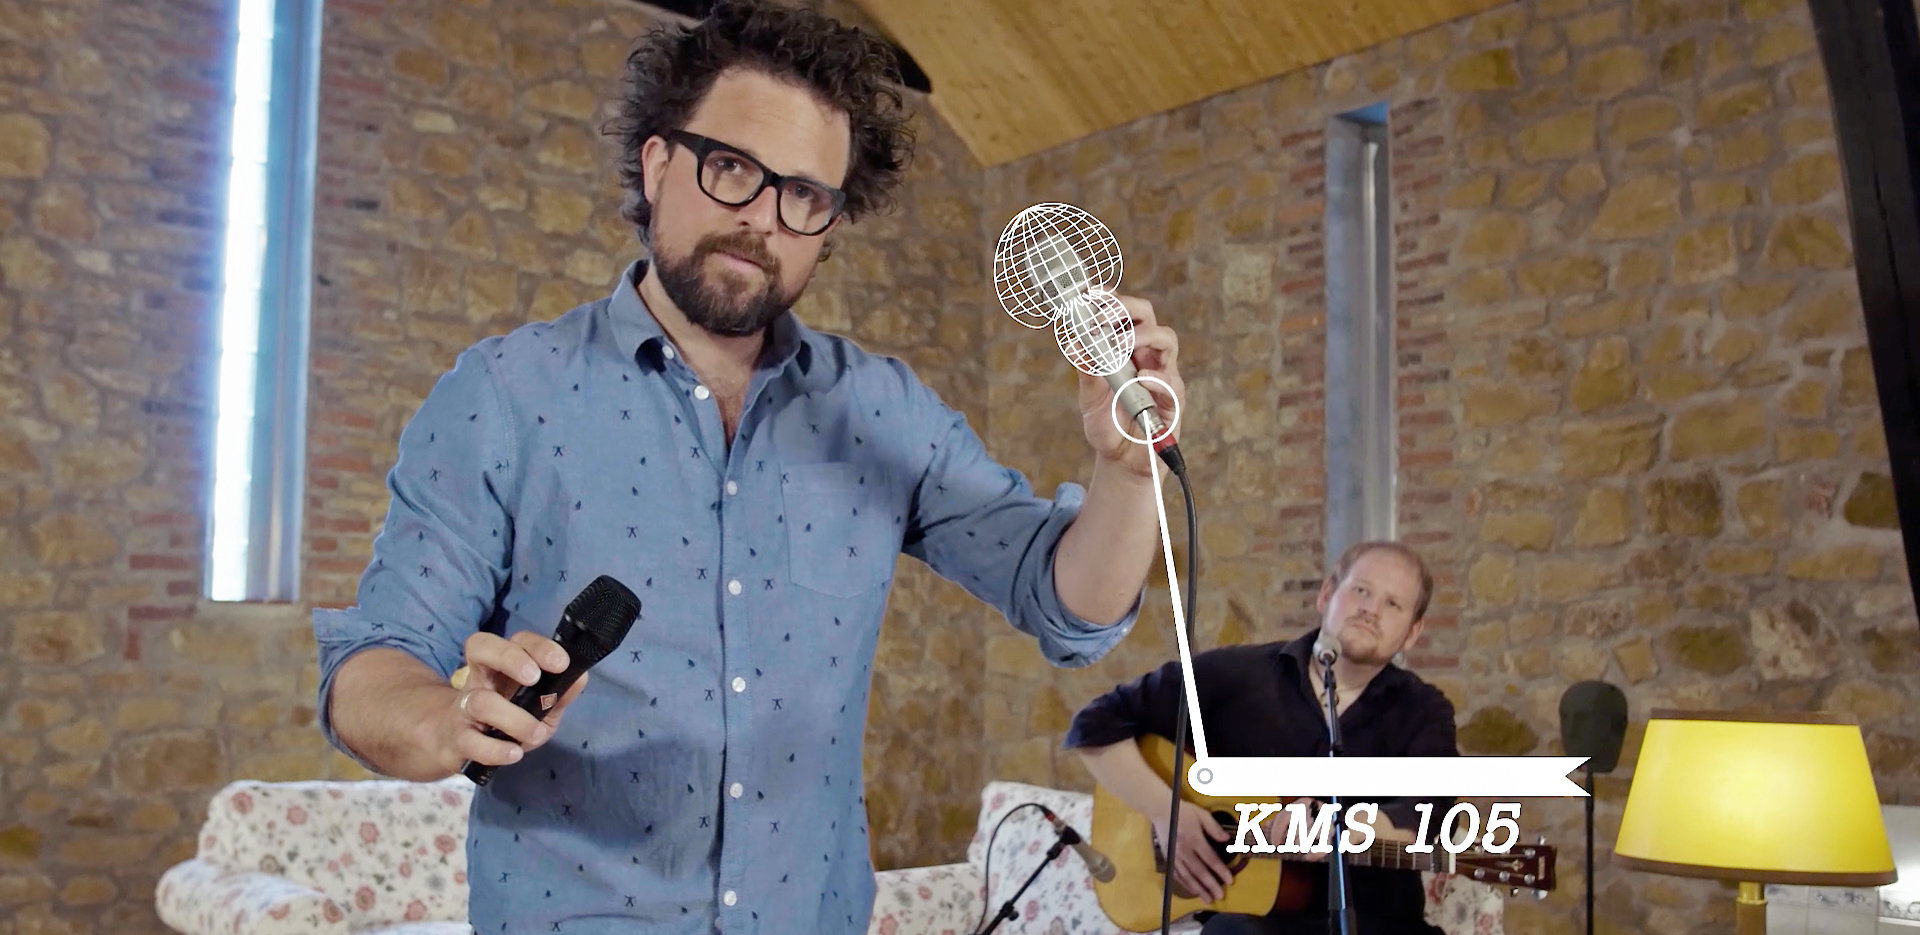 Recording a Singer-Songwriter with two Stage Mics